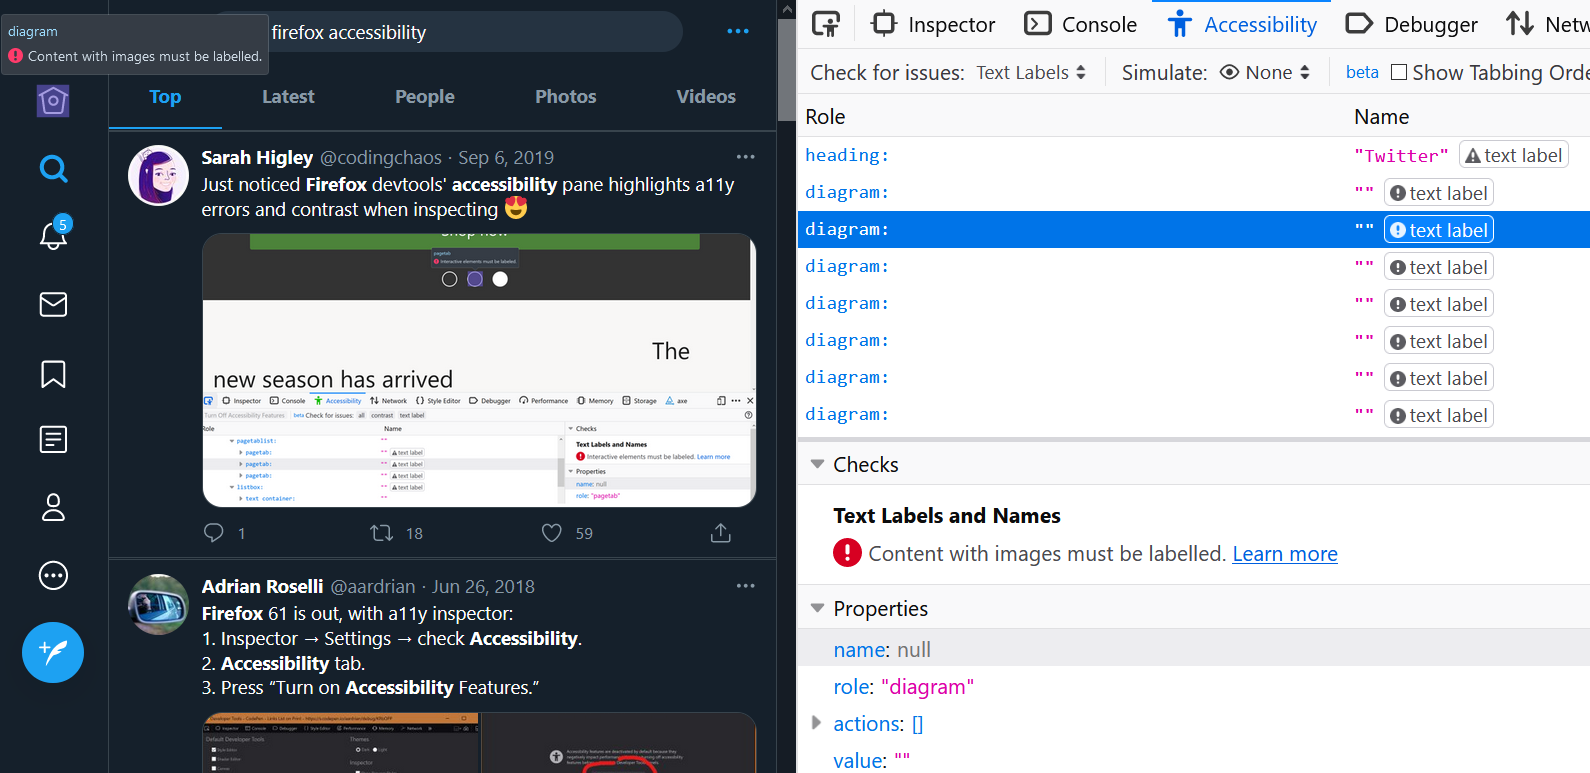 Twitters main navigation flagged as having images without labels